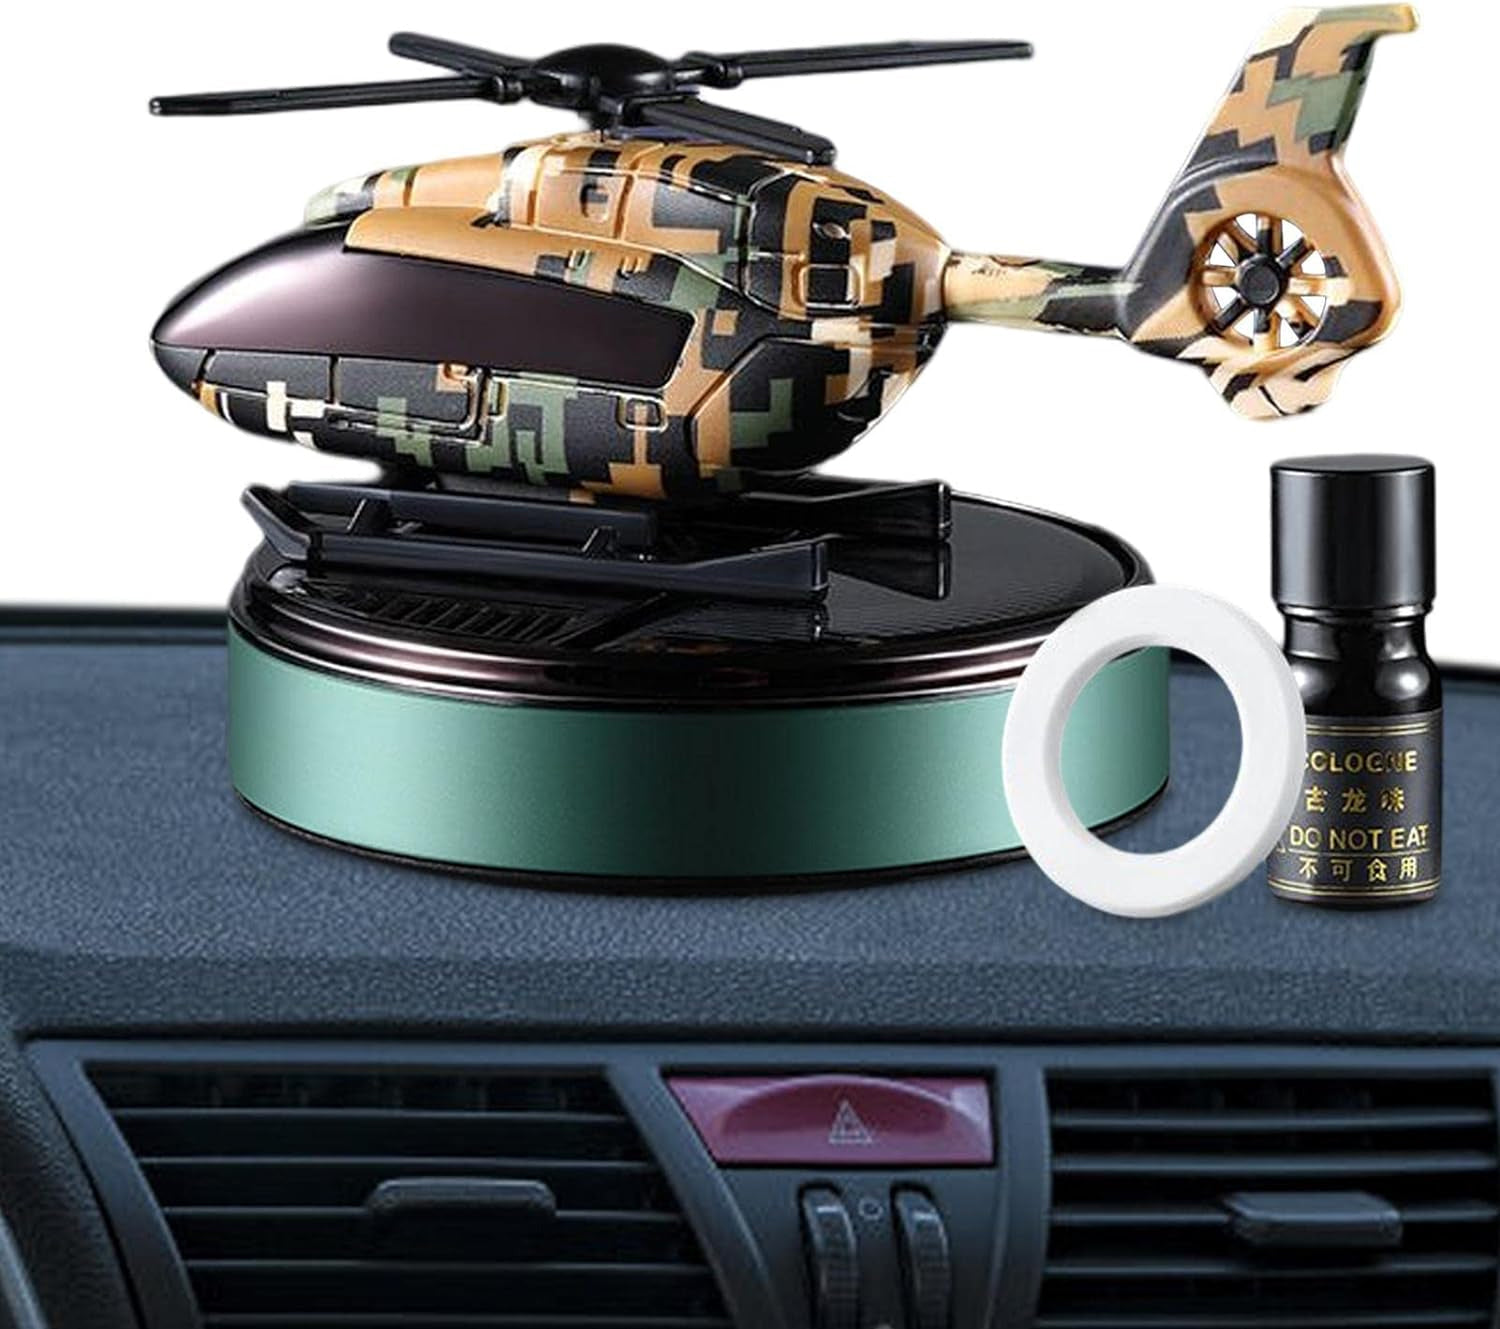 Solar-Powered Helicopter Car Air Freshener - Innovative Solar Car Perfume for a Creative and Fresh Driving Experience